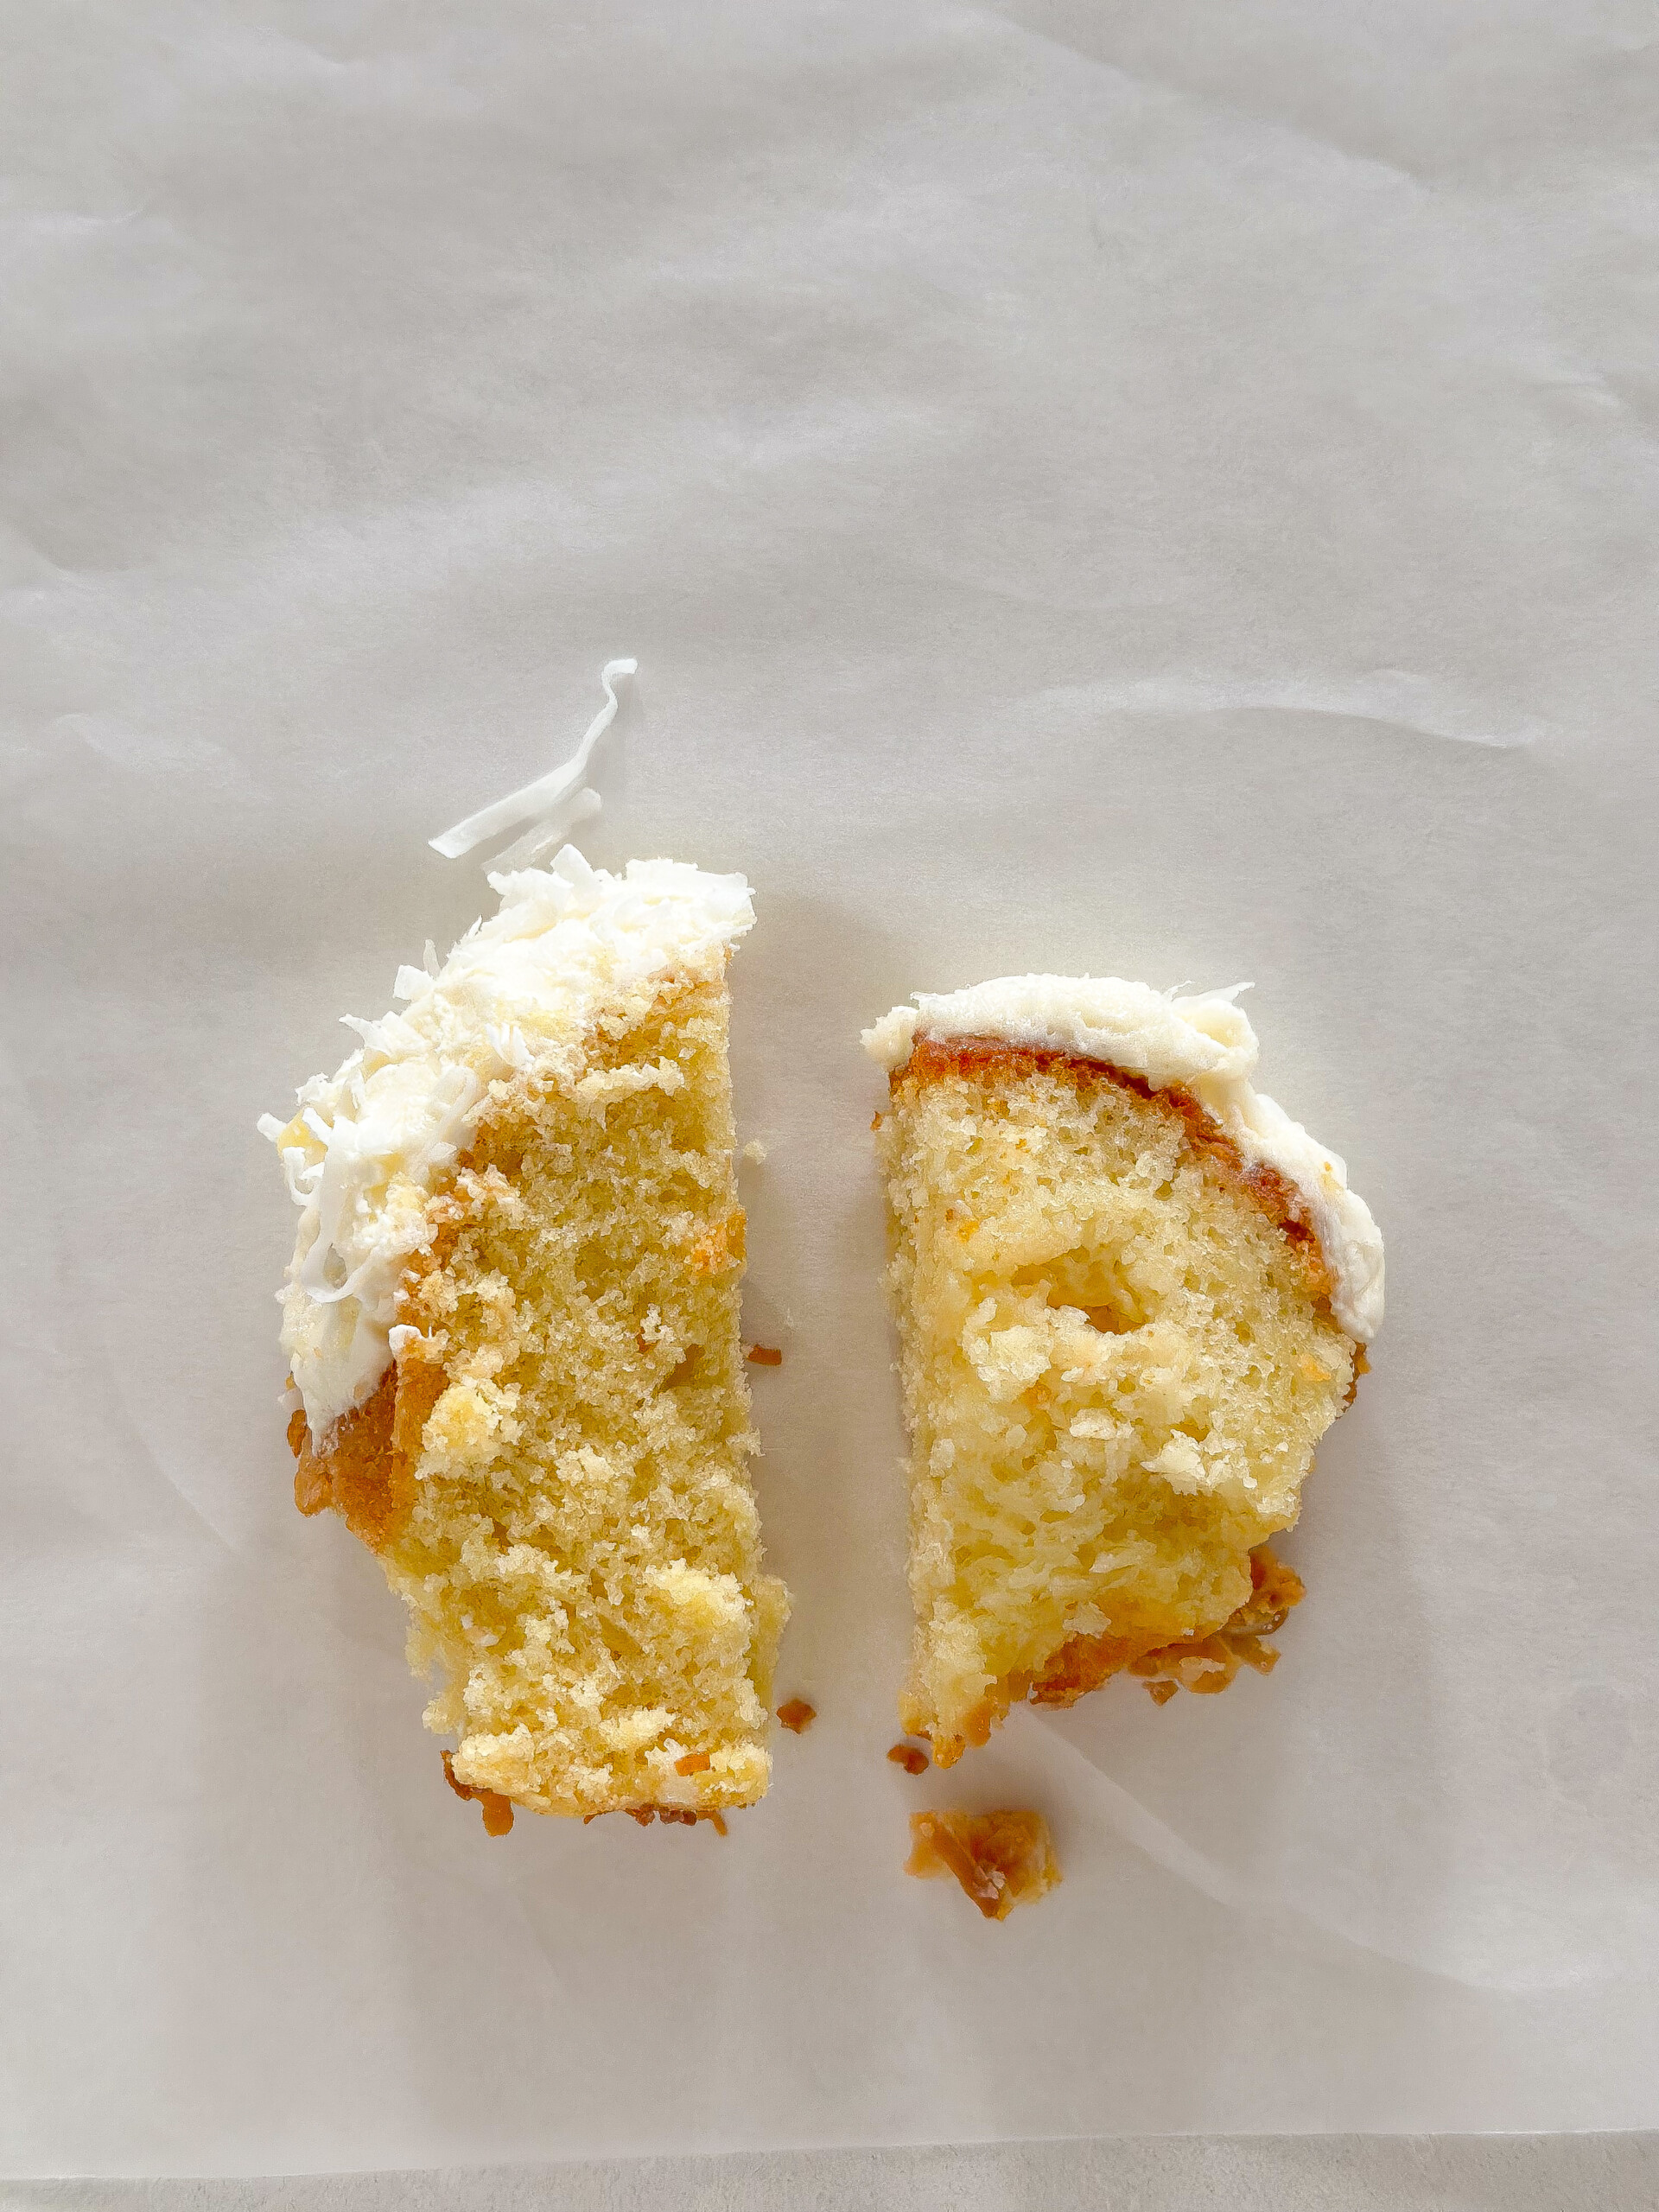 Two cake slices next to each other on parchment paper.